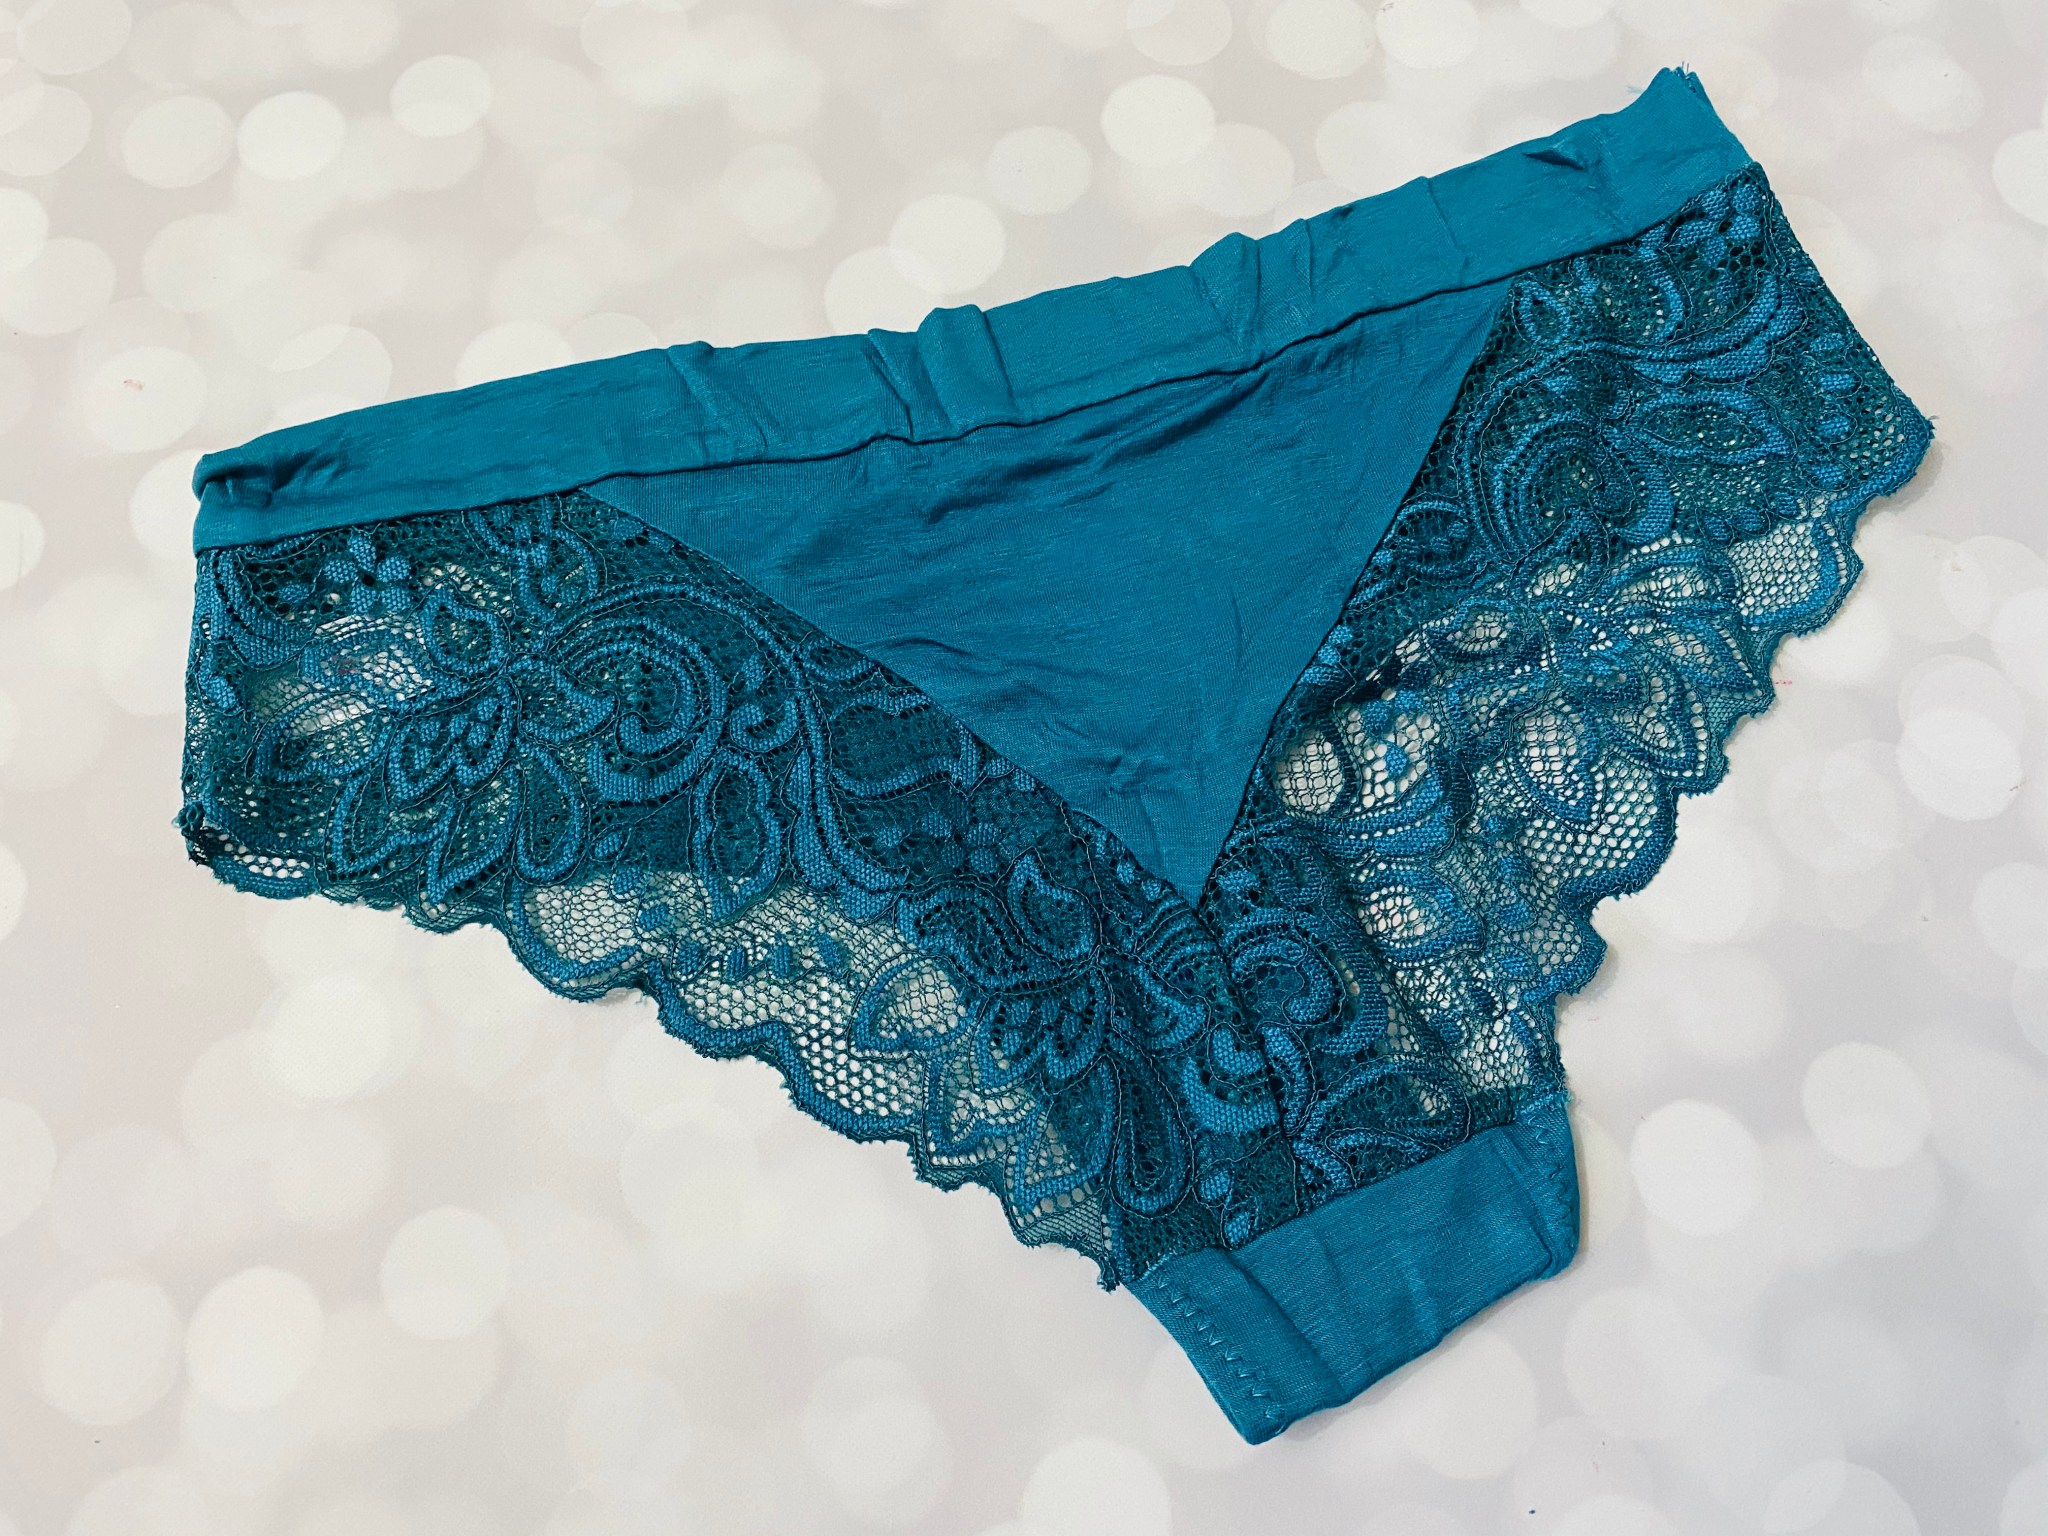 Knotty Knickers June 2020 Subscription Box Review - Hello Subscription